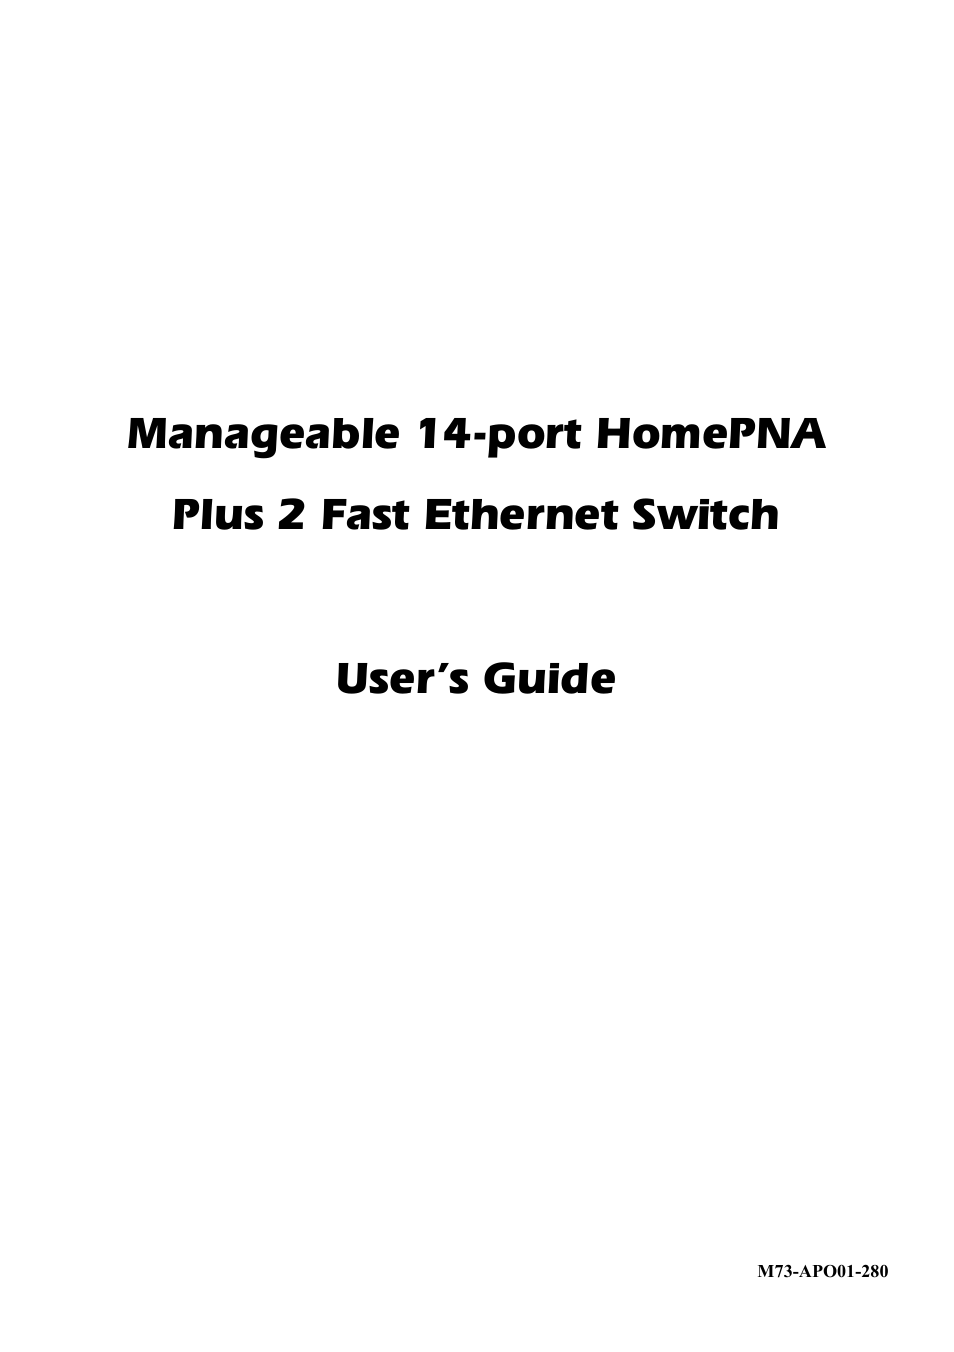 Manageable 14-port HomePNA Plus 2 Fast Ethernet Switch